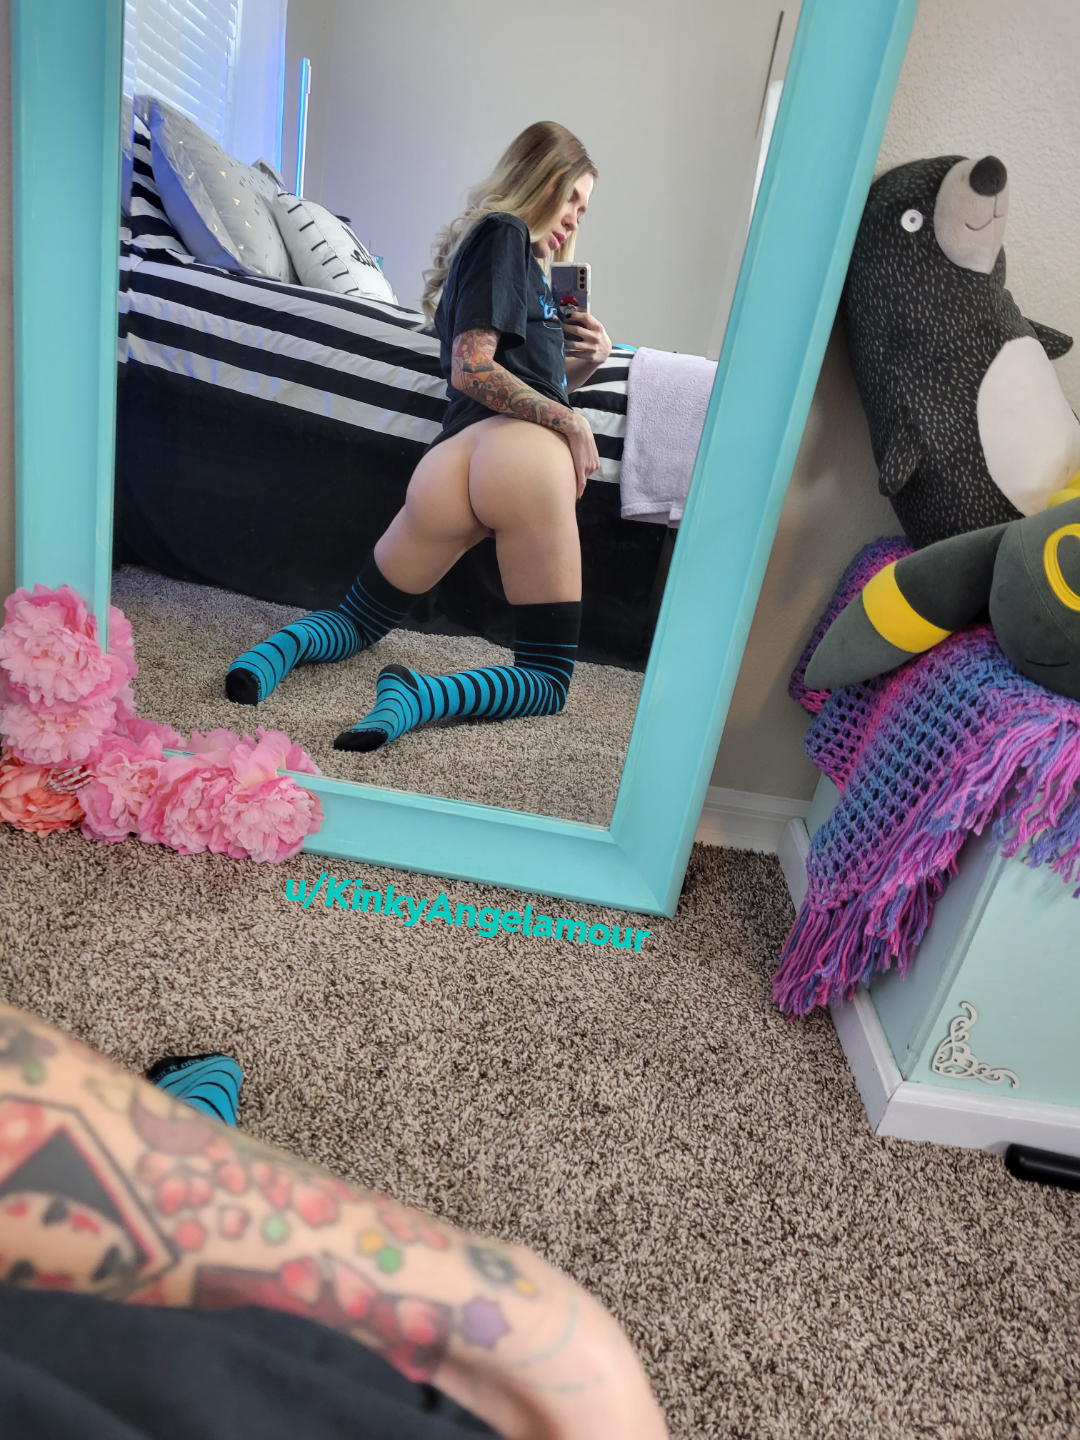 Thigh high socks stay ON during